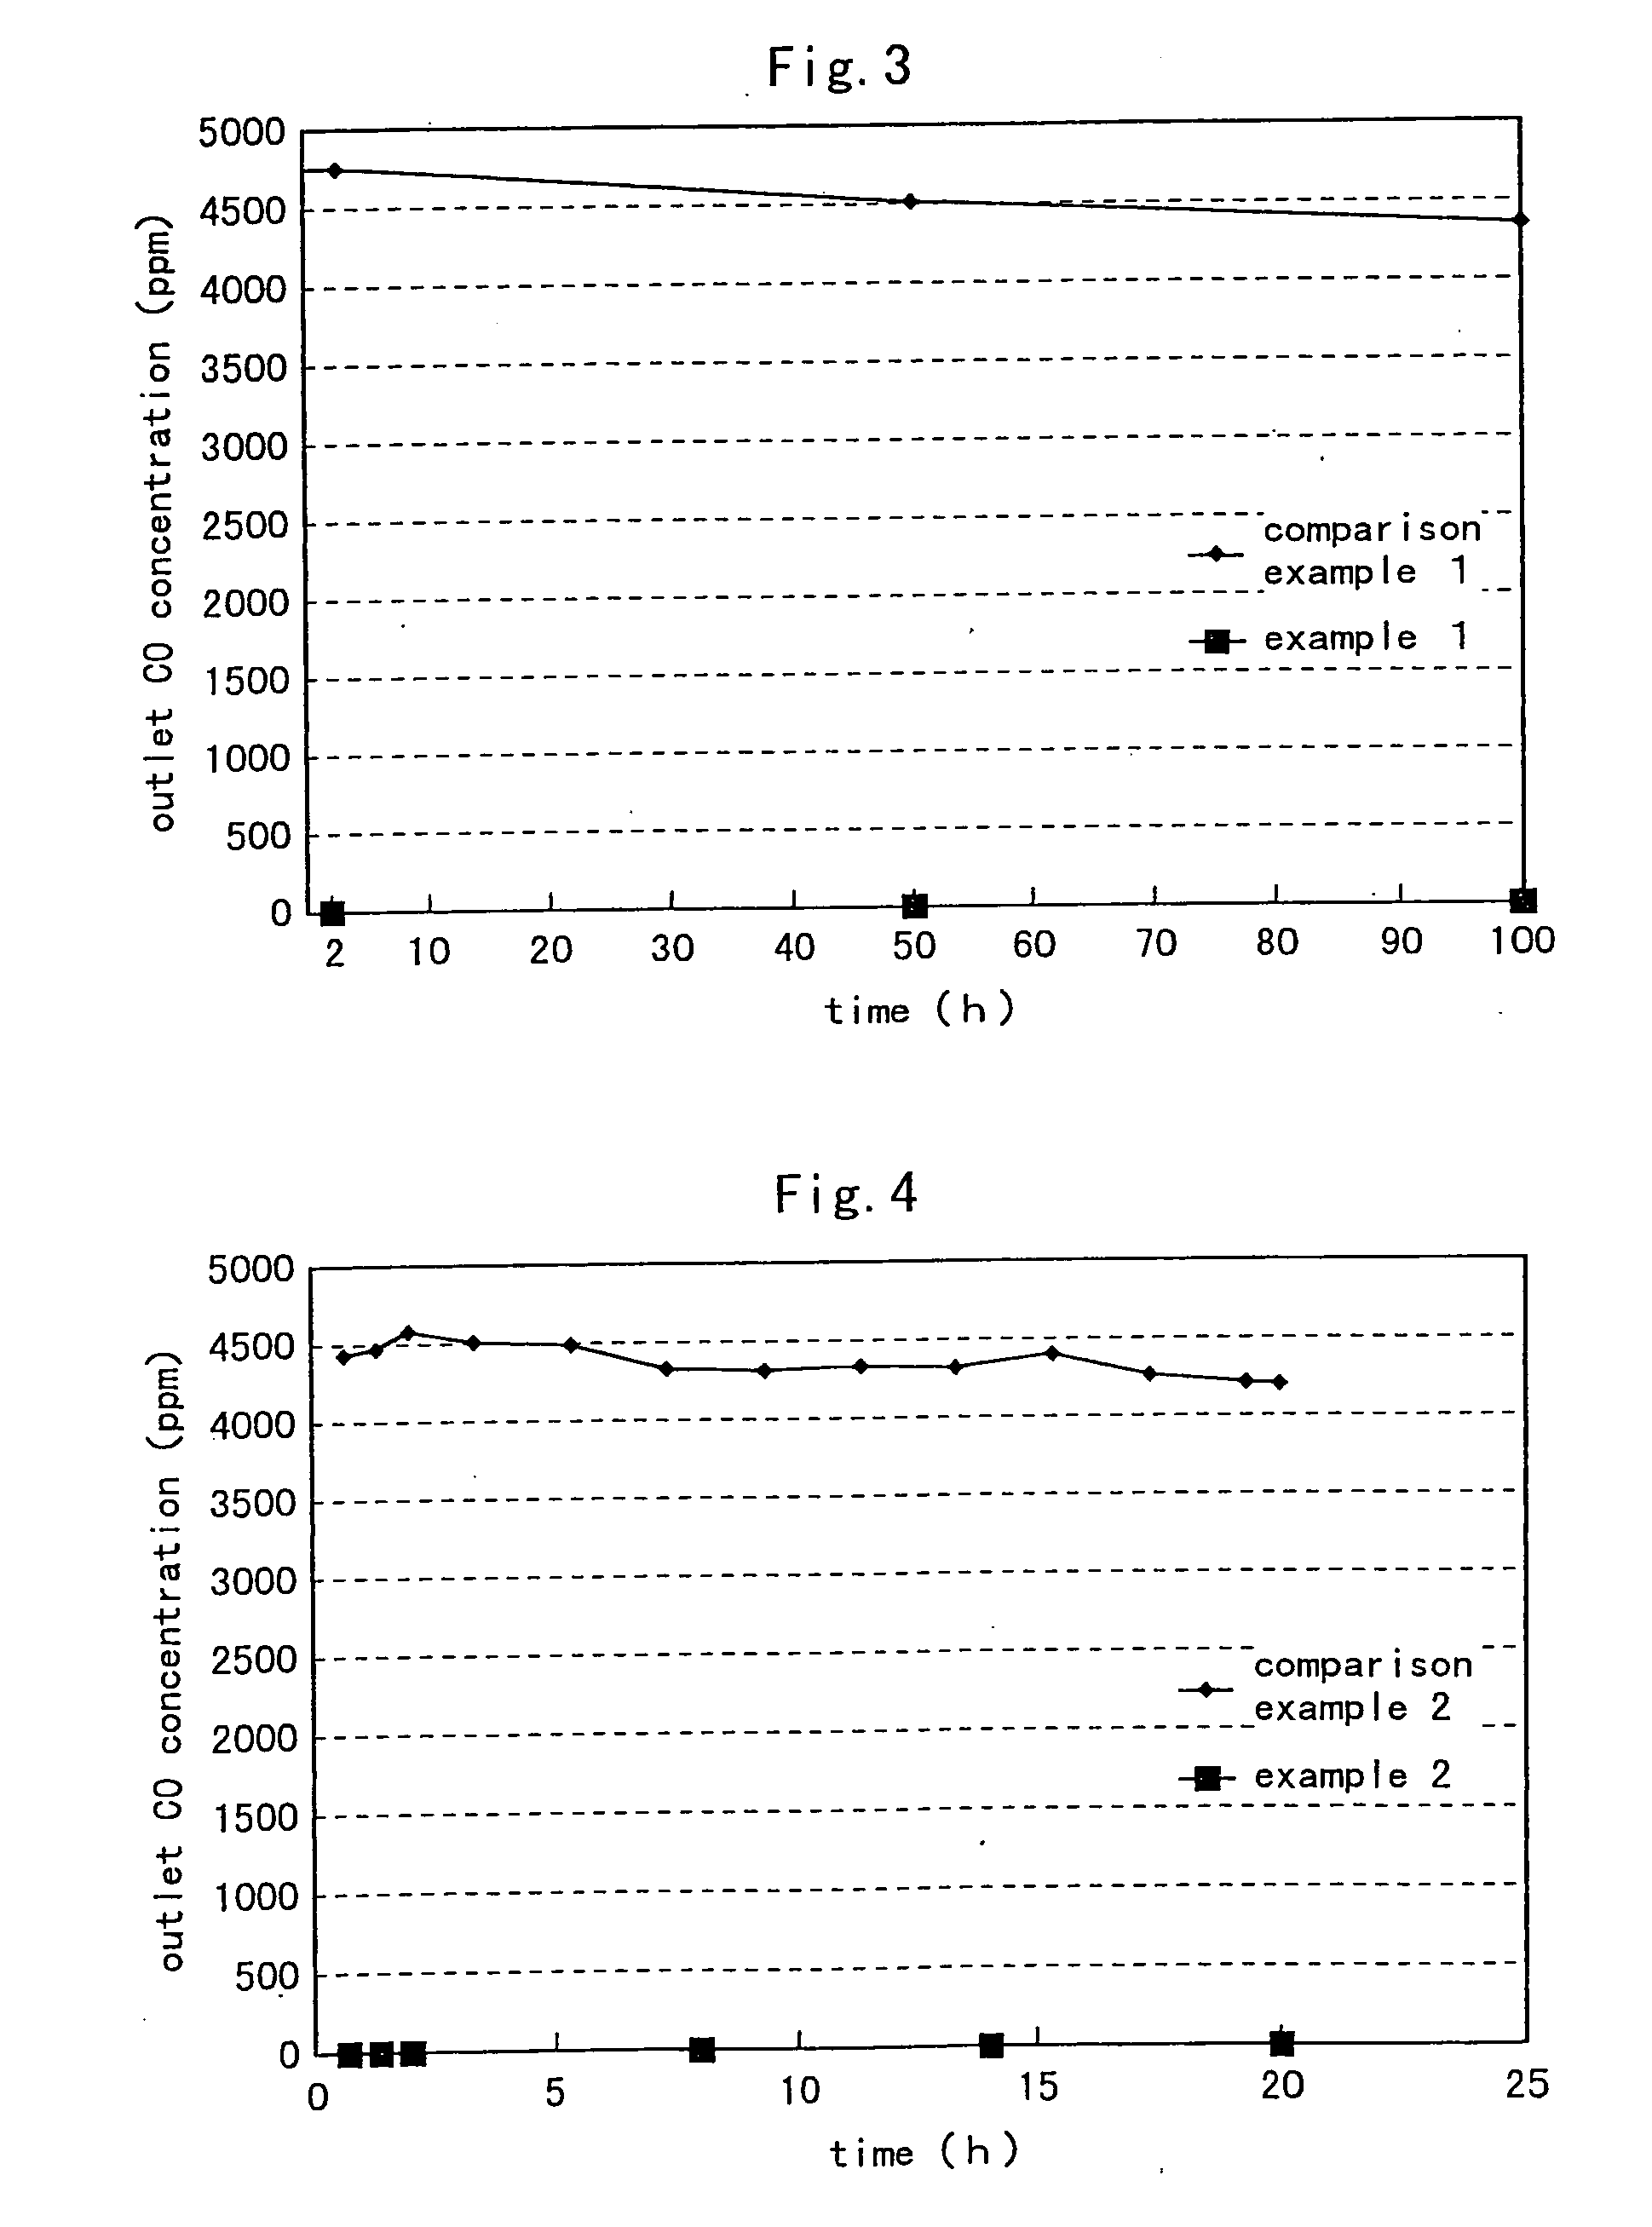 Method of activating carbon monoxide removing catalyst, carbon monoxide removing catalyst, method of removing carbon monoxide and method of operating fuel cell system